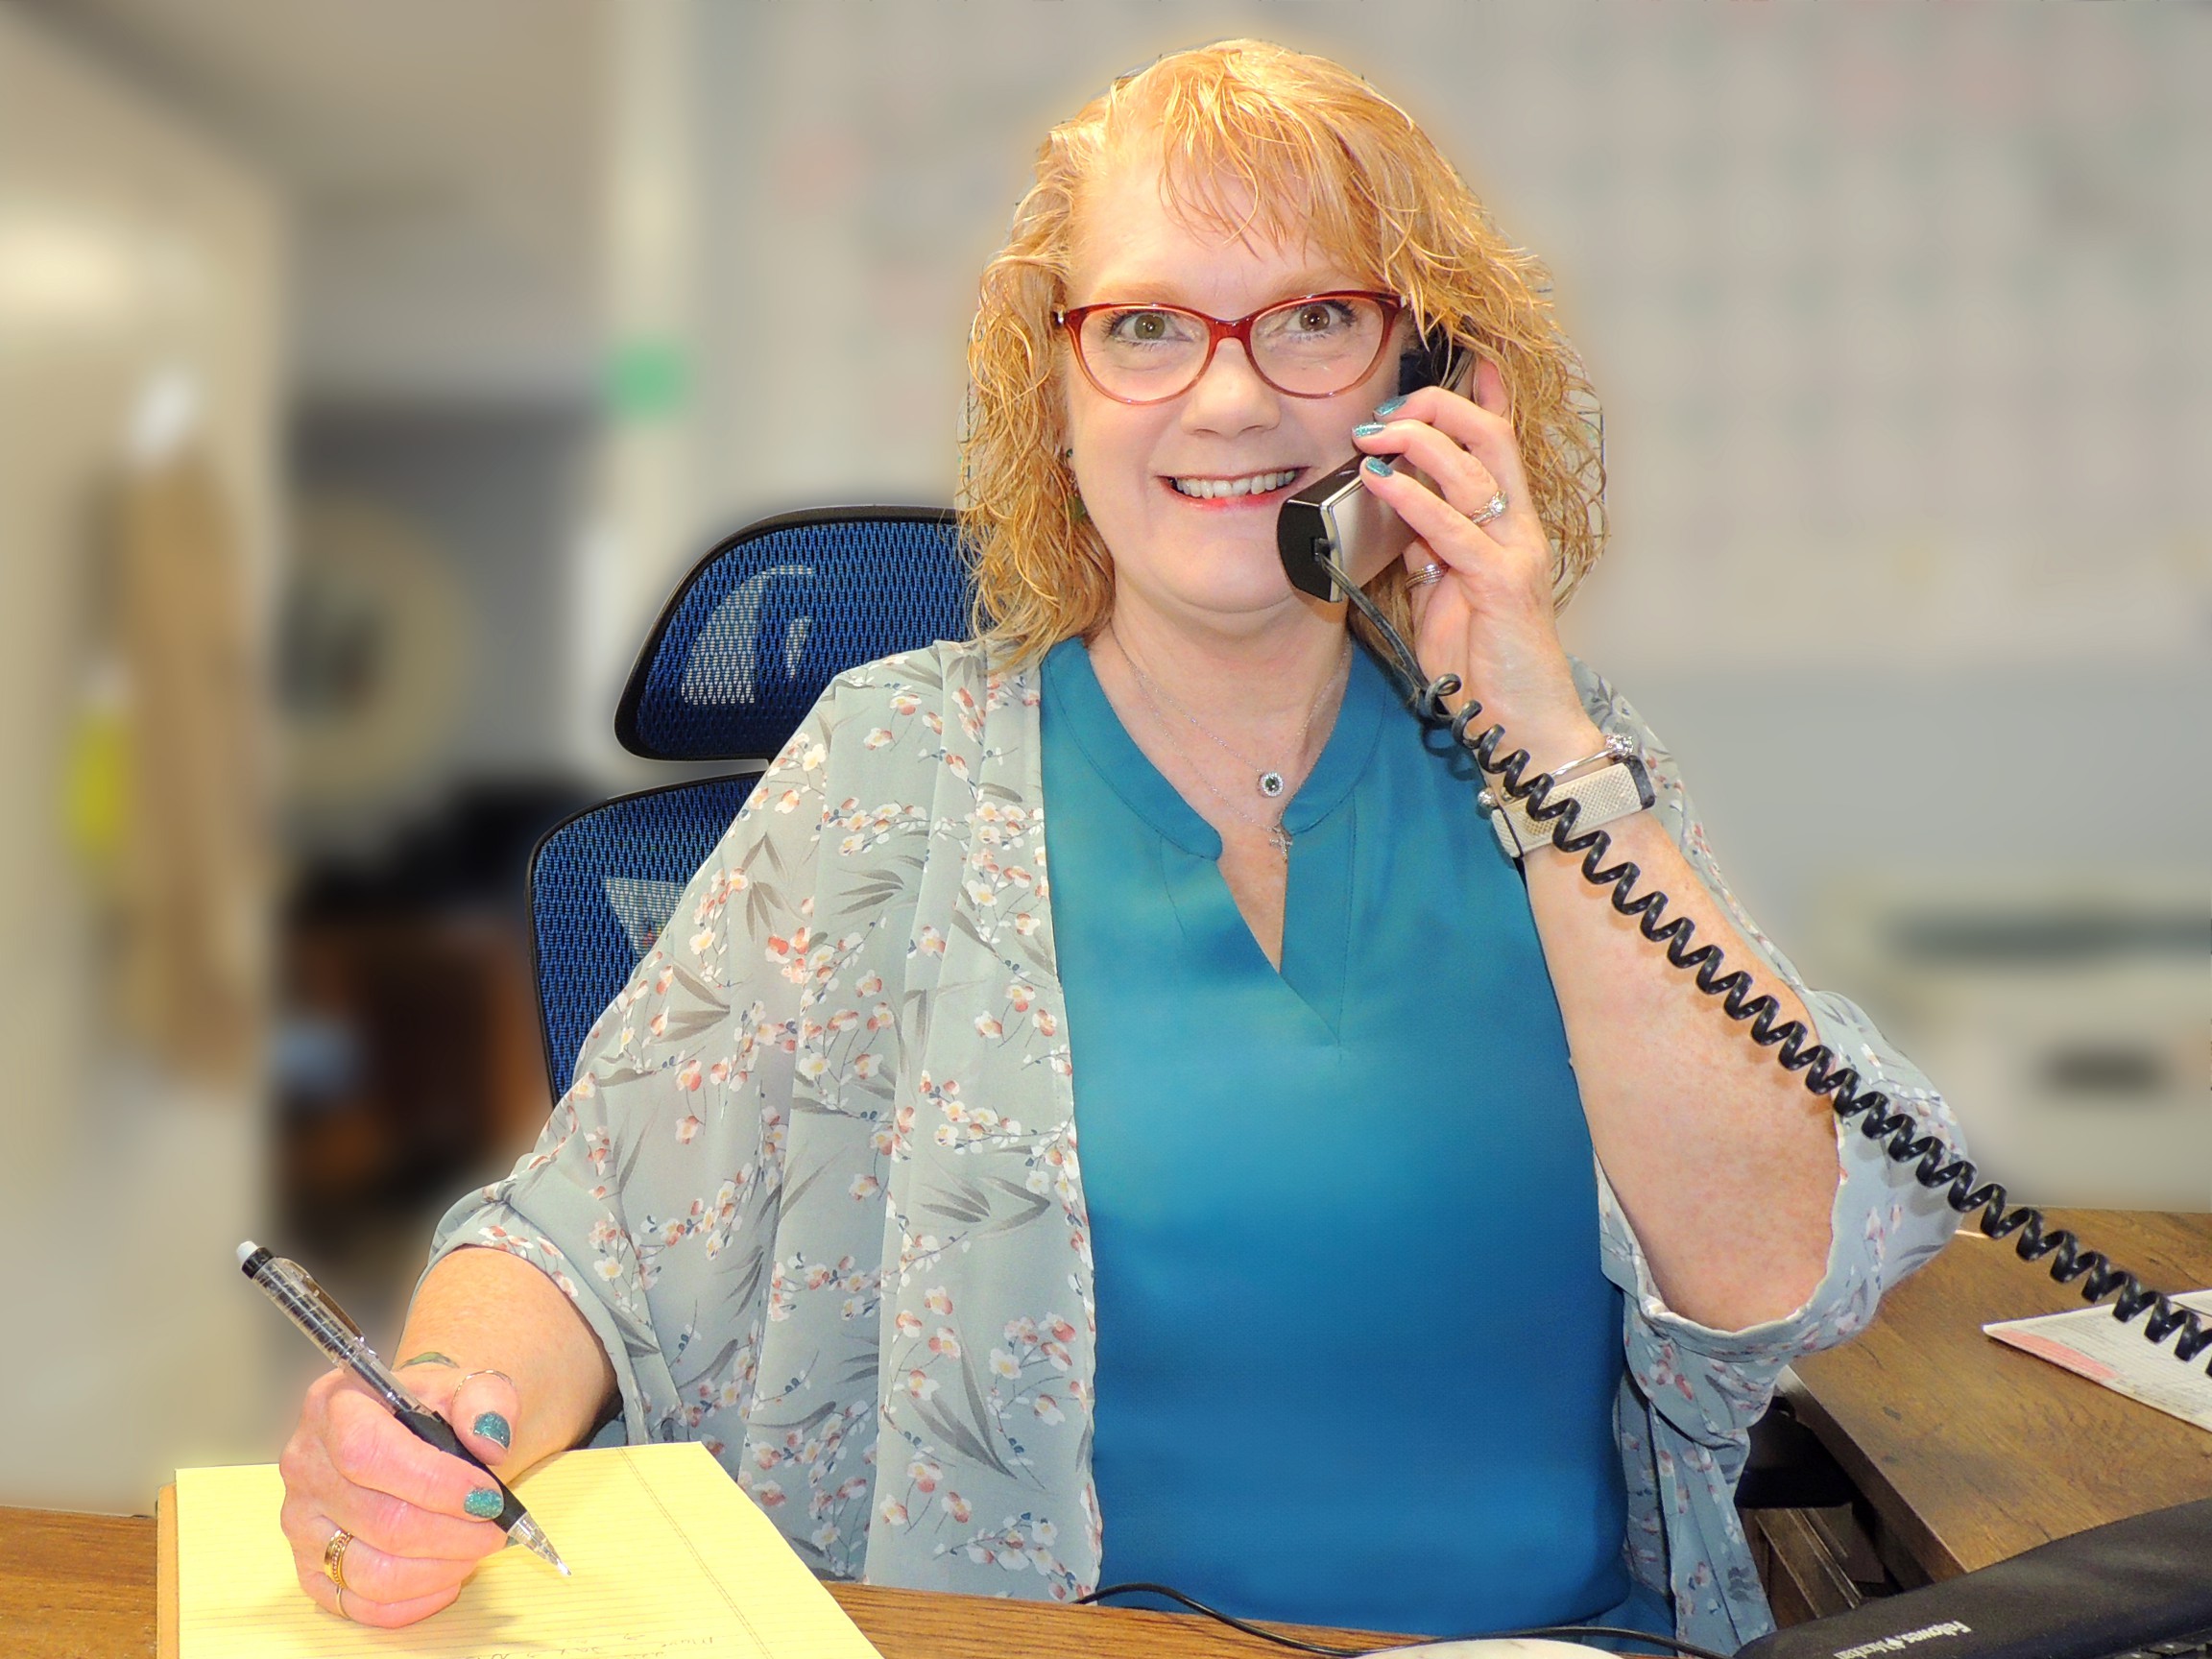 Debi is here to assist with questions, schedule your move, and provide support for the owners.